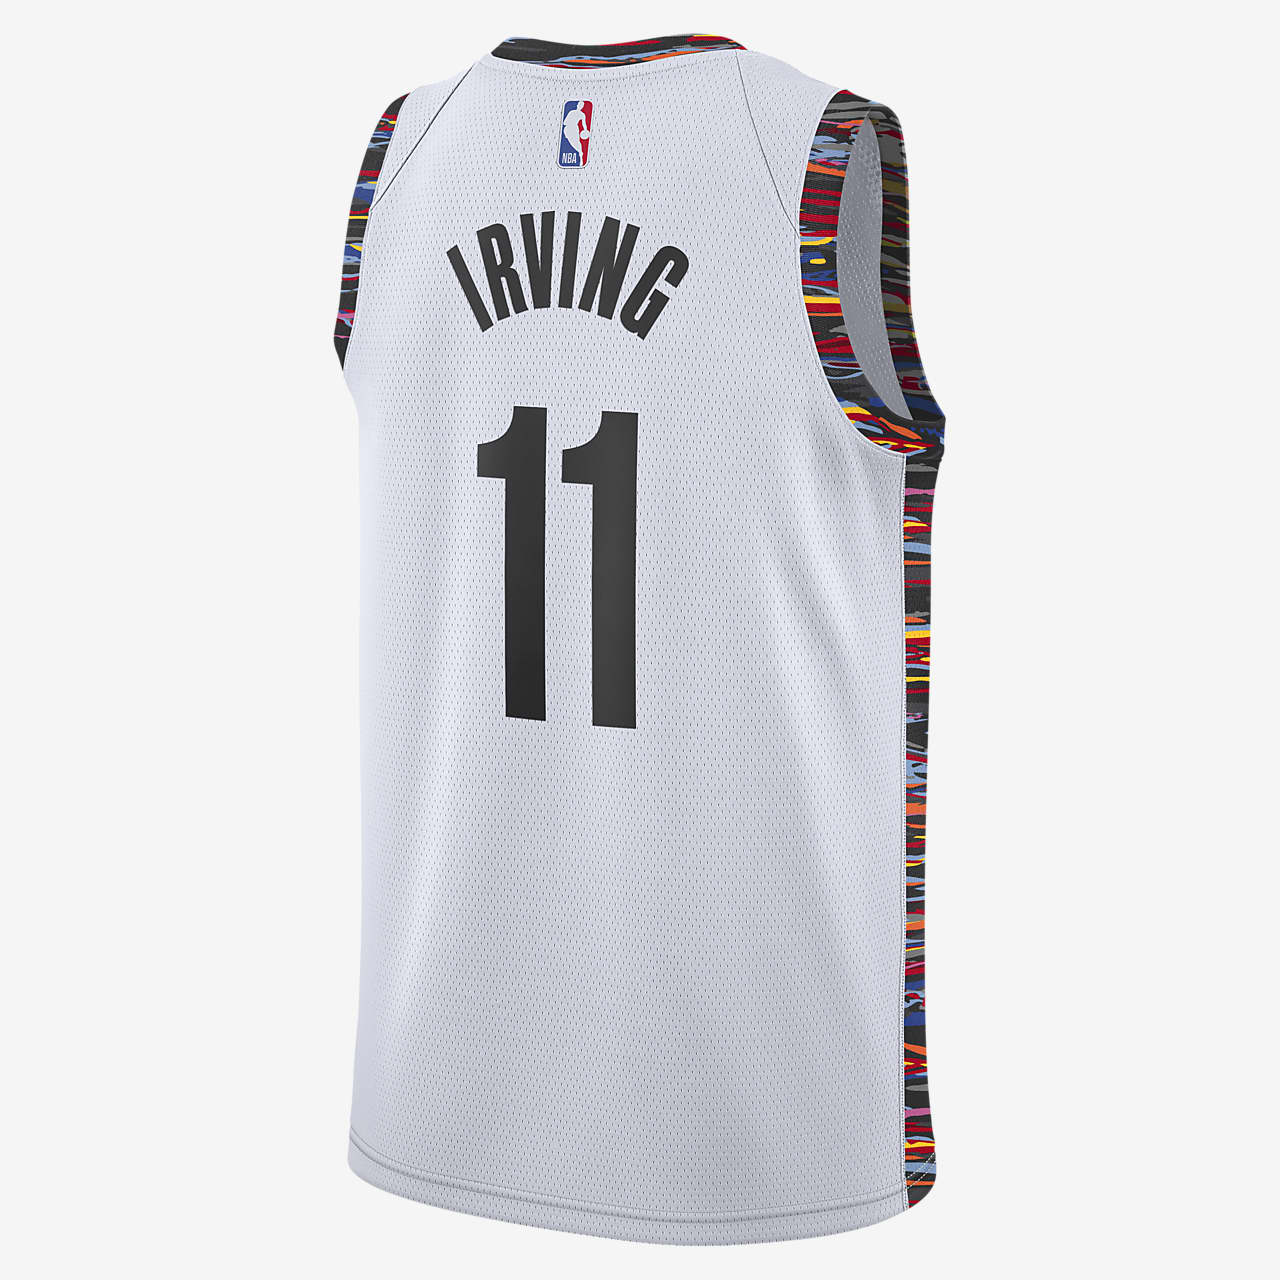 Kyrie Irving #11 Brooklyn Nets Basketball Trikot Stitched City Edition Weiß 